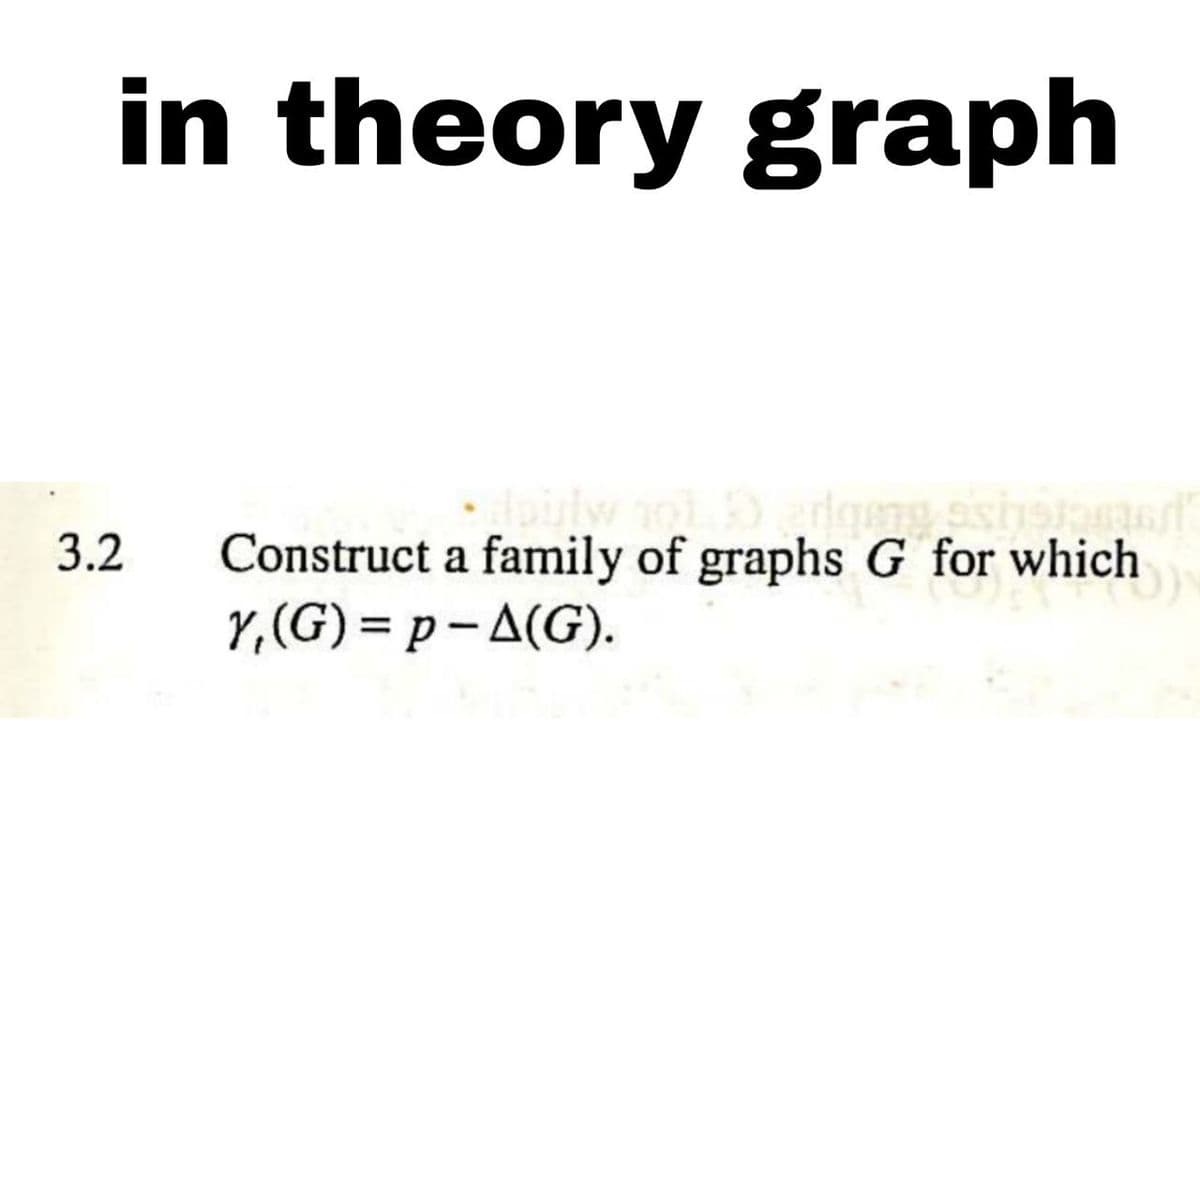 in theory graph
3.2
Construct a family of graphs G for which
Y,(G)=p-A(G).
25)